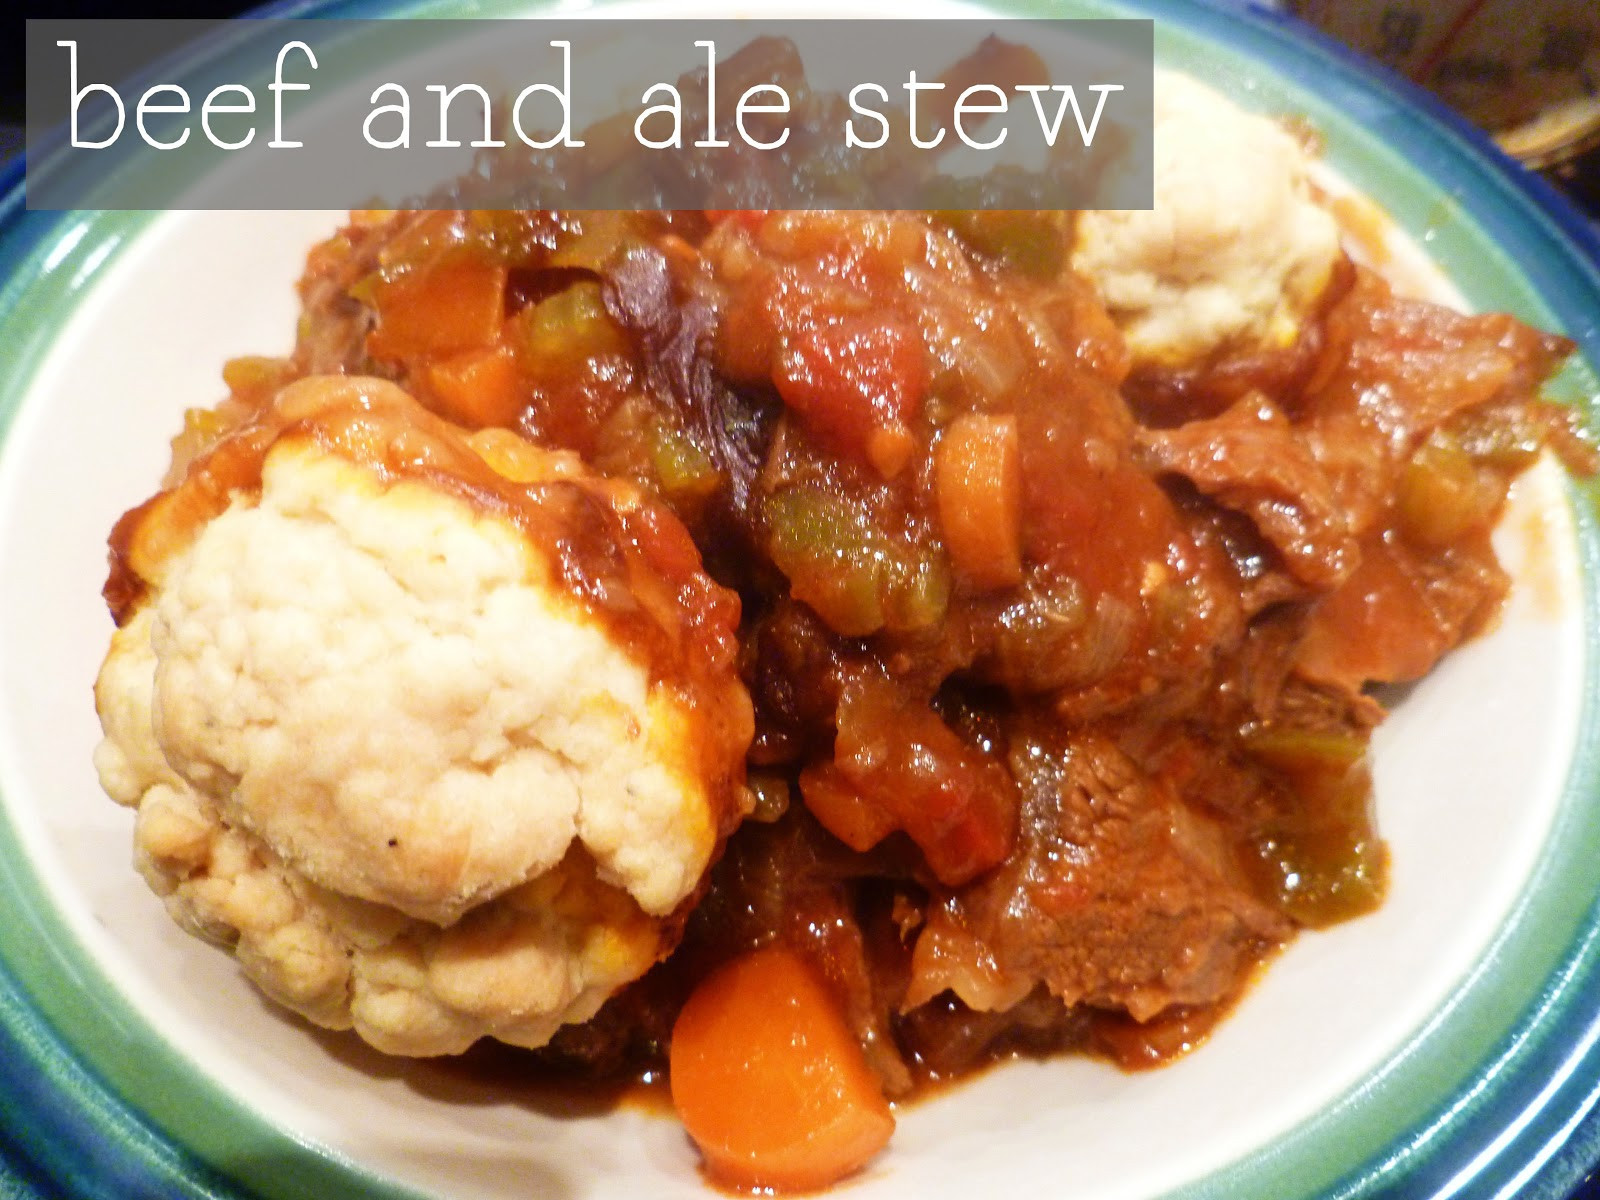 Vegetable Stew Jamie Oliver
 25 the Best Ideas for Ve able Stew Jamie Oliver